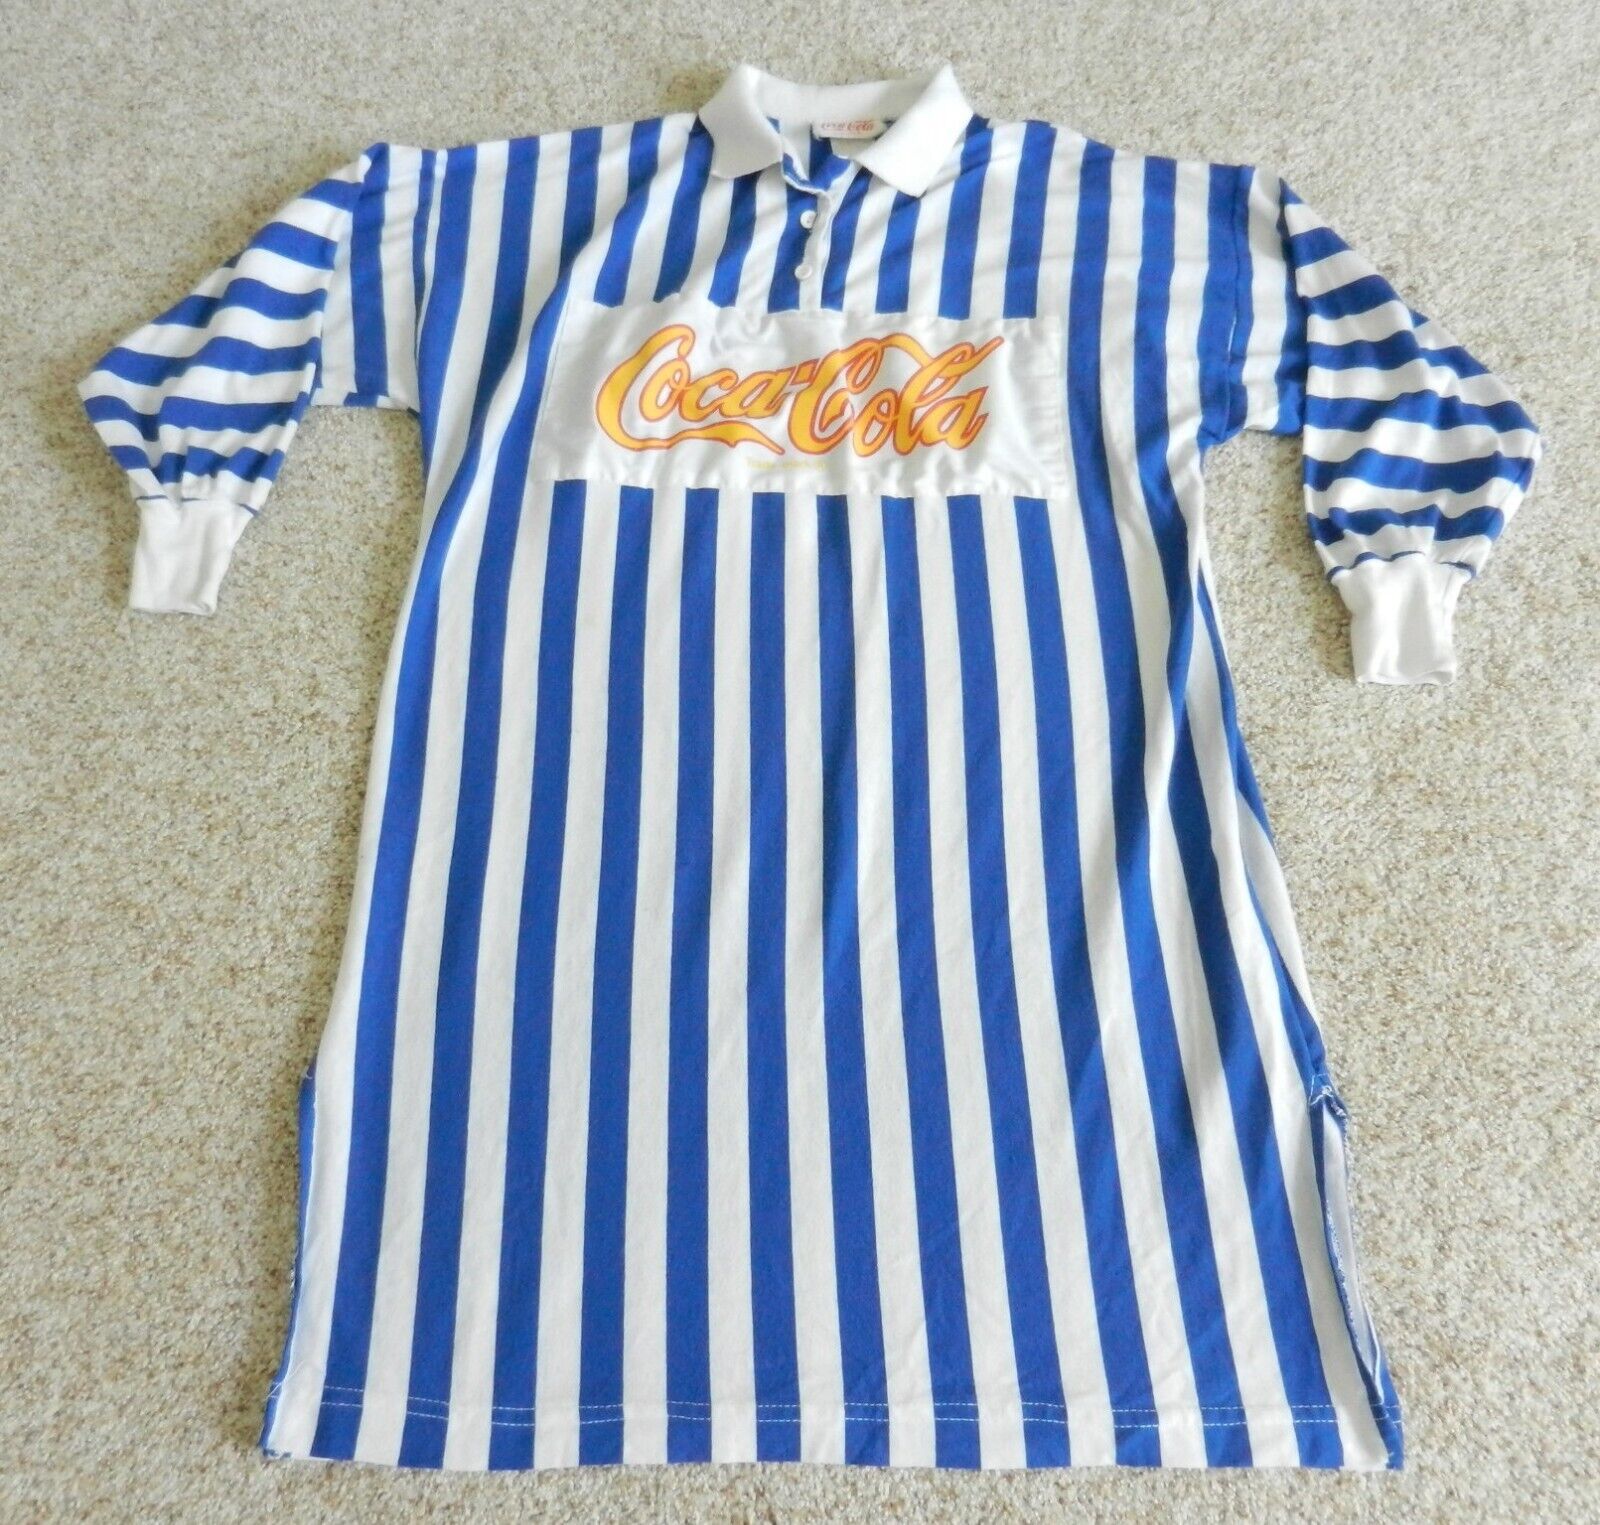 Vintage Rugby style Coca Cola blue/white sleep shirt with collar